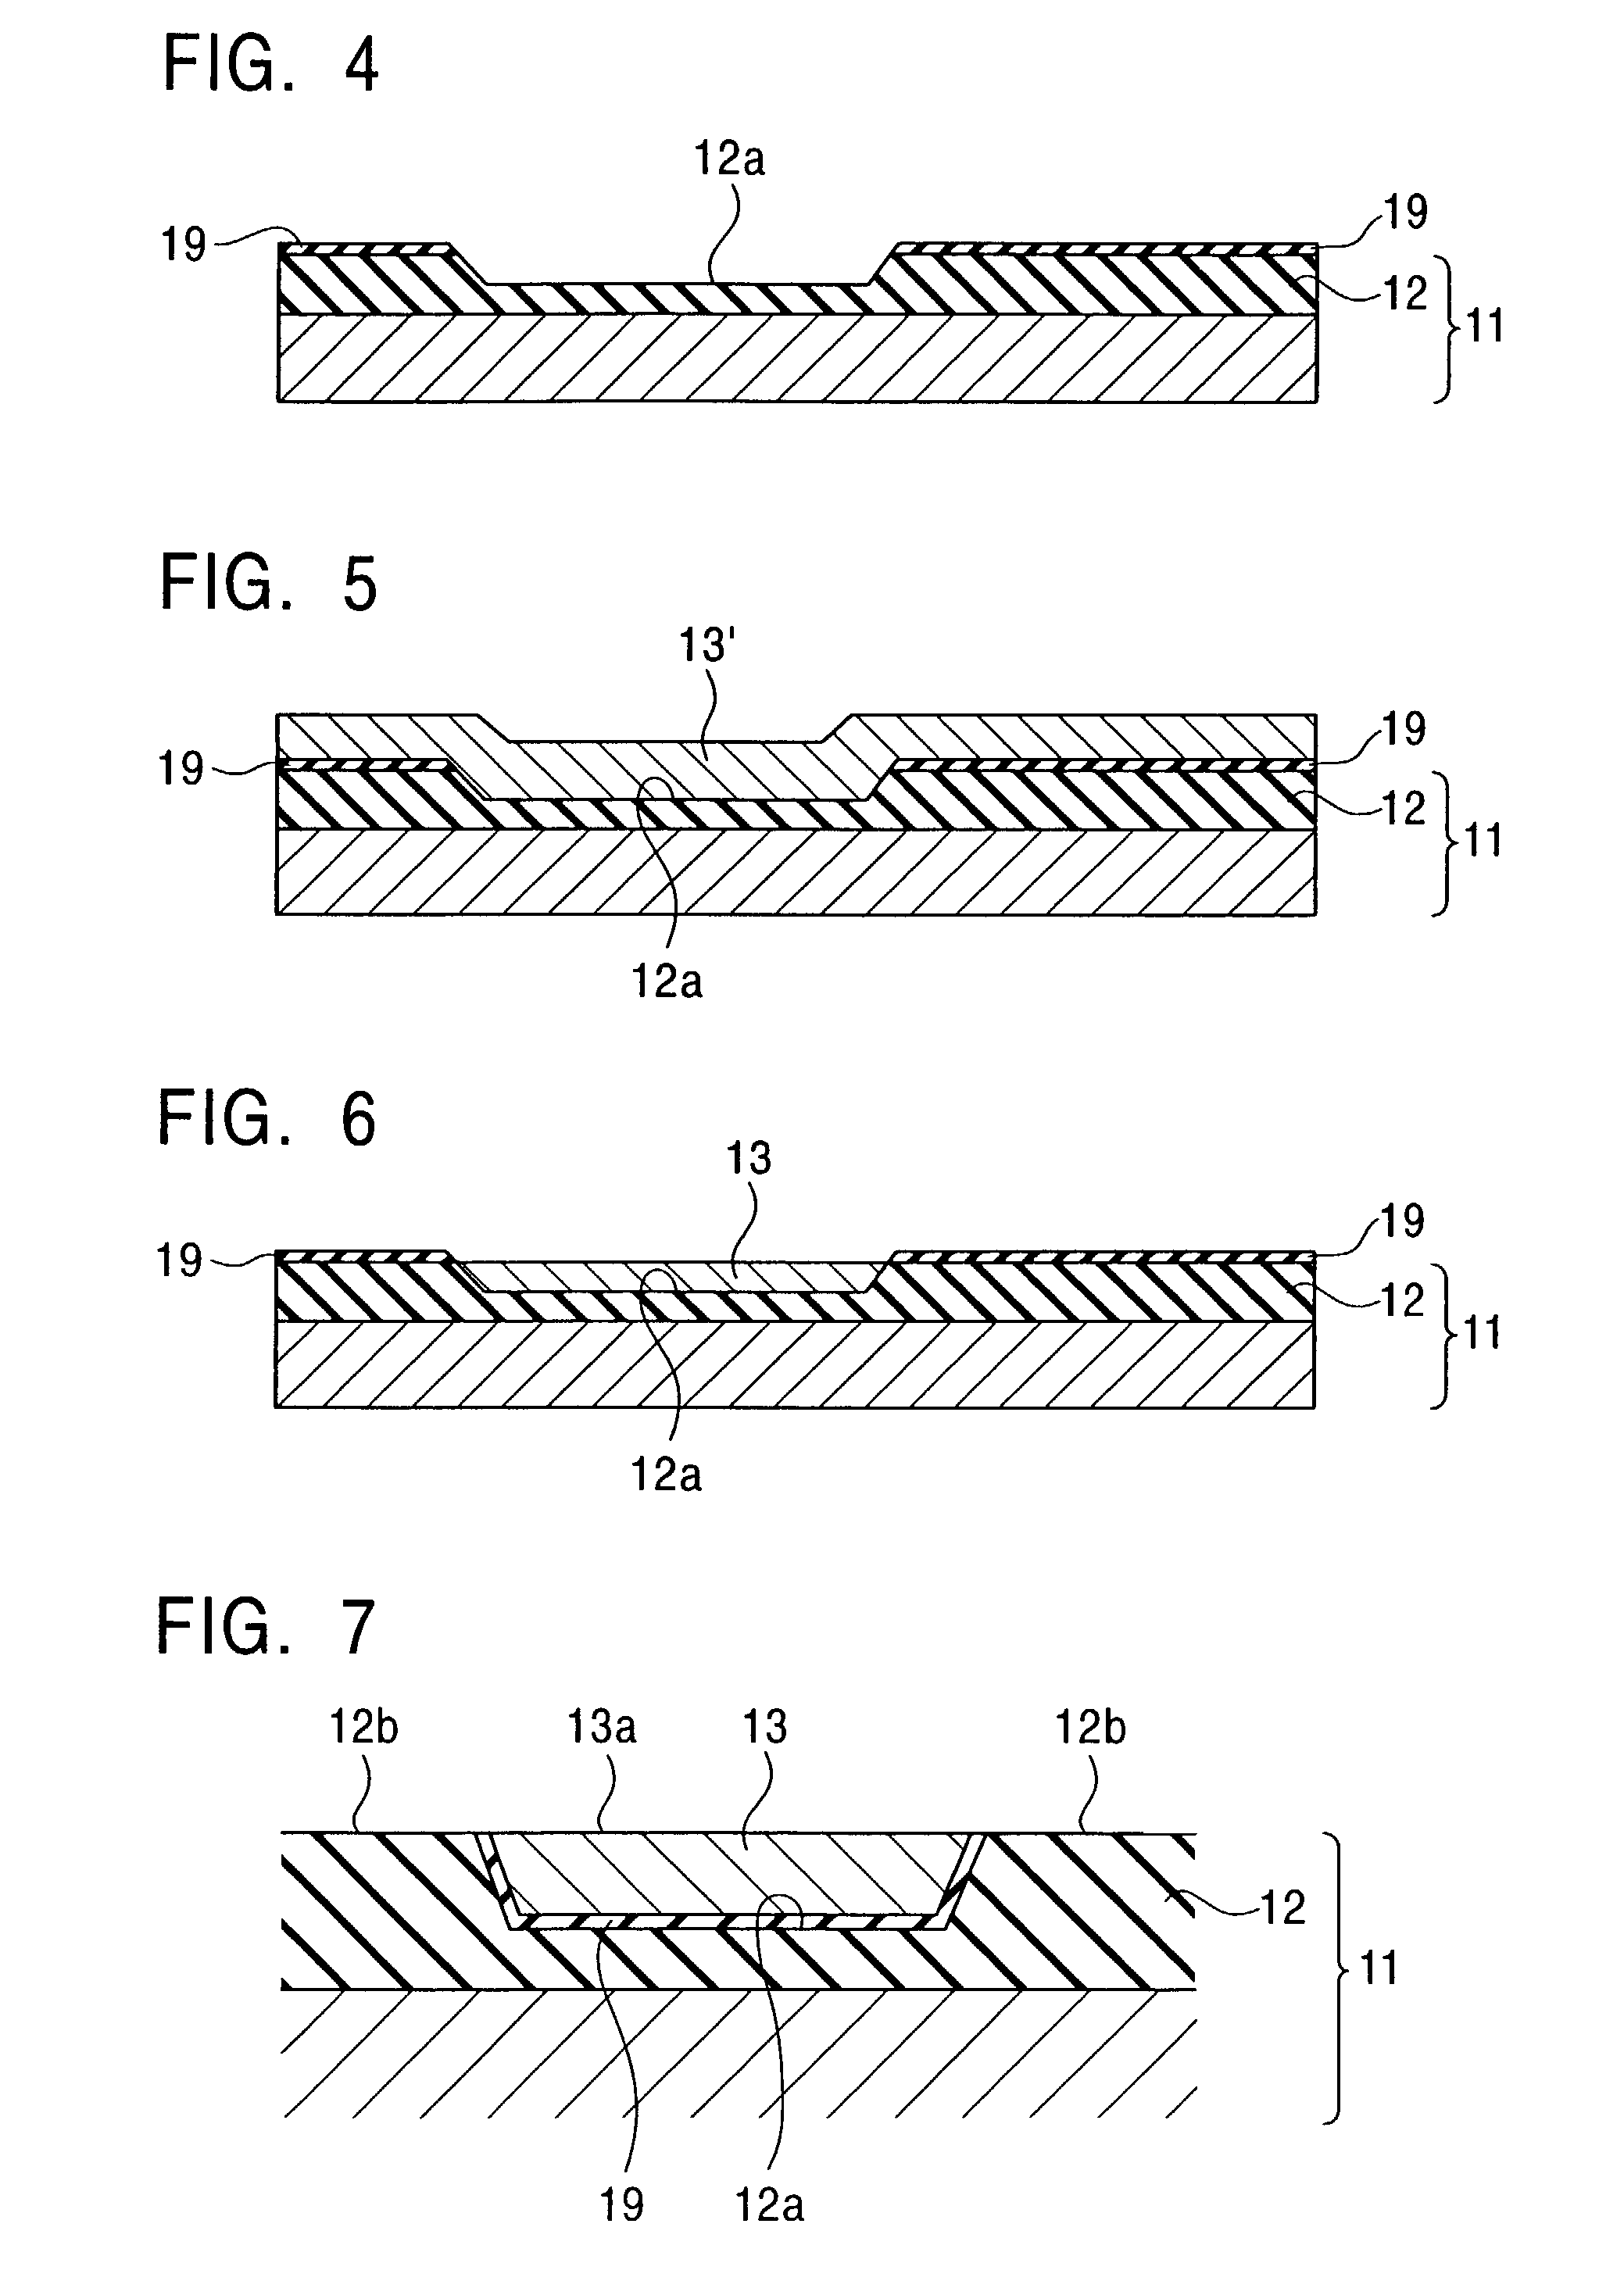 Thin-film magnetic head and method of forming the same